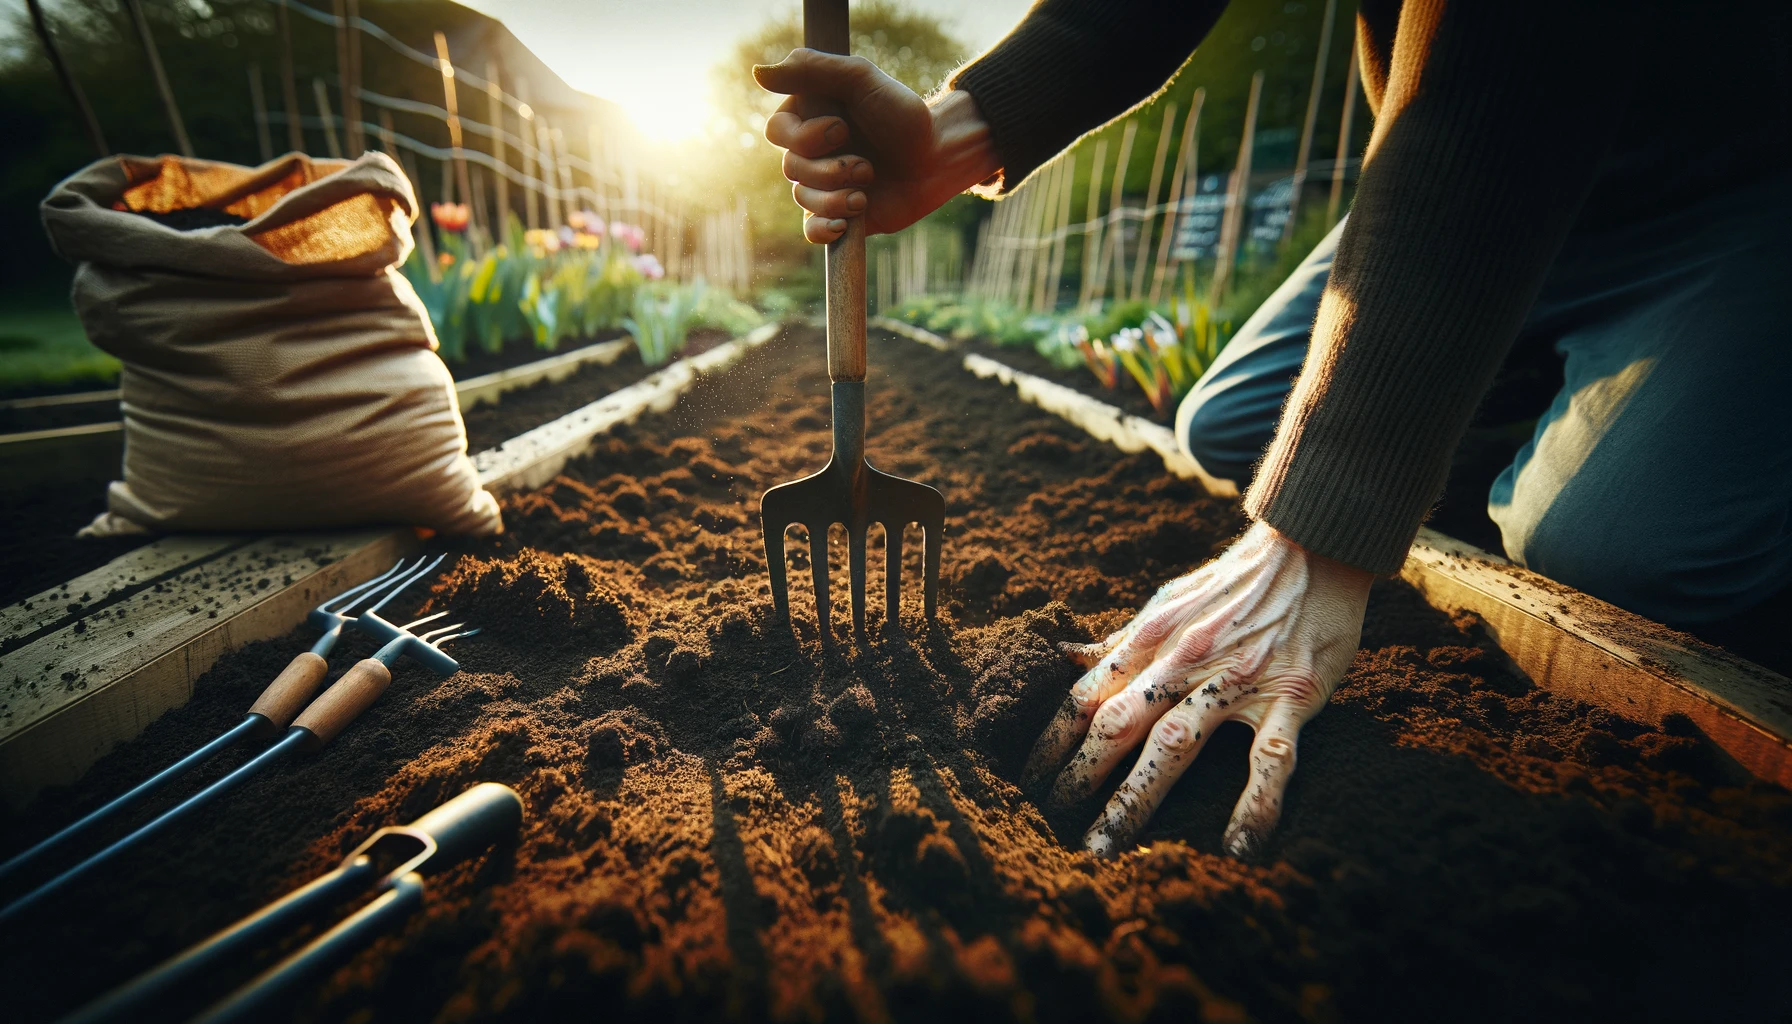 Gardening, planting with tools and gloves in sunlight.